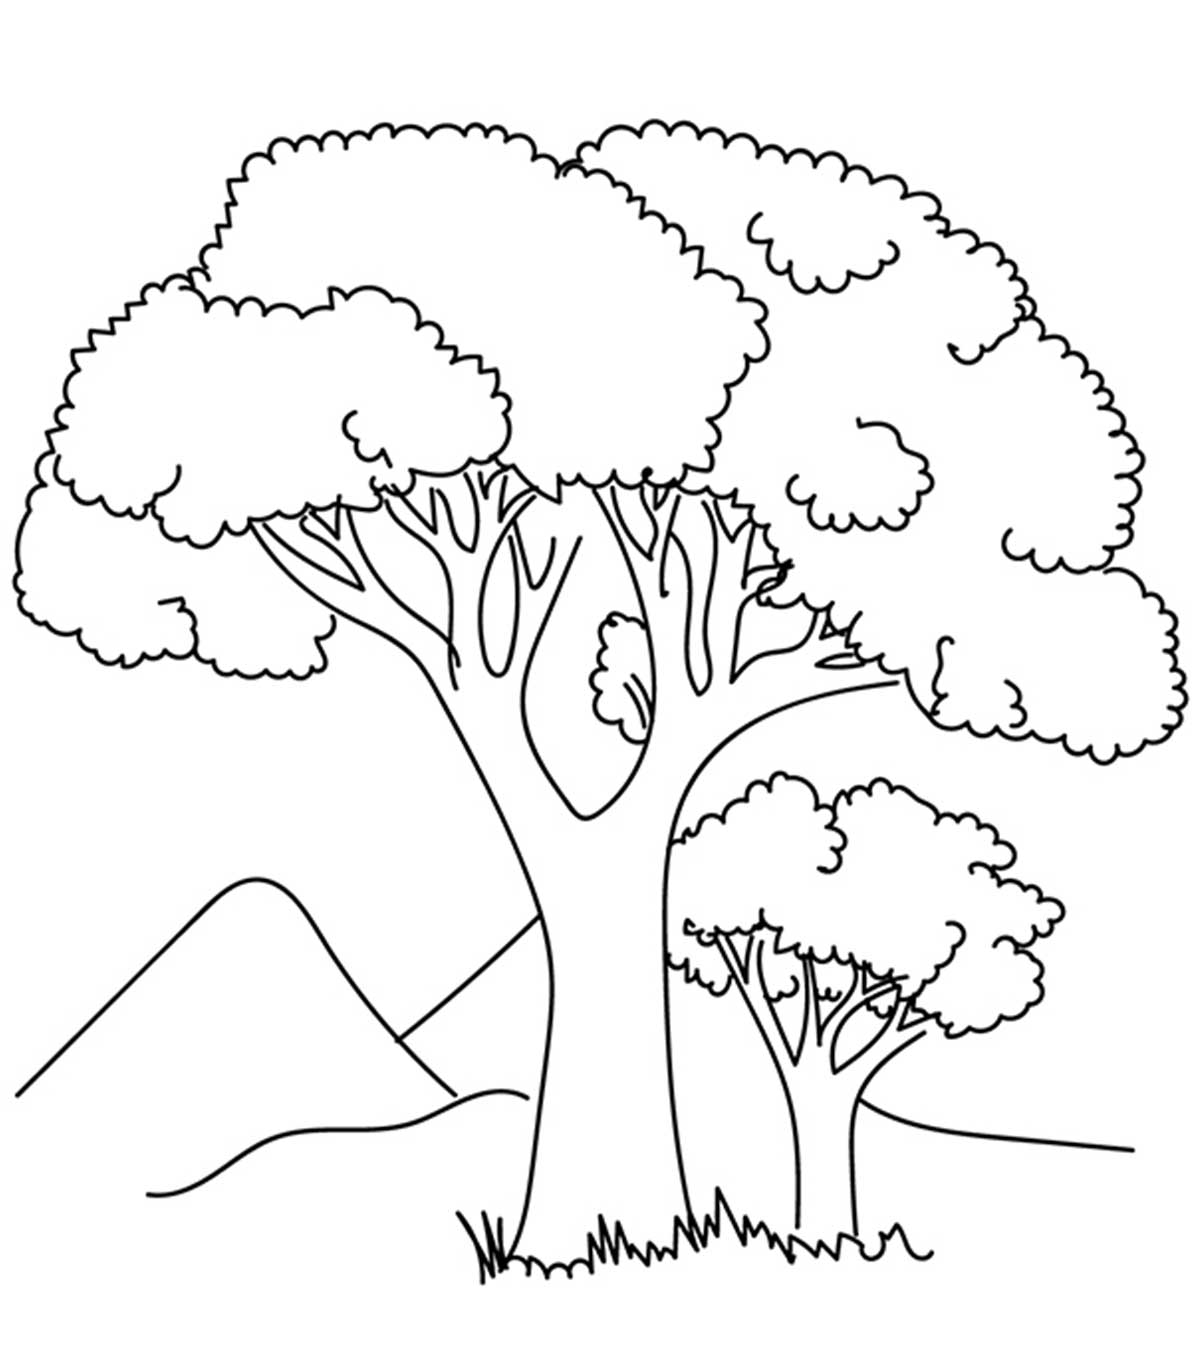 Download Top 25 Tree Coloring Pages For Your Little Ones